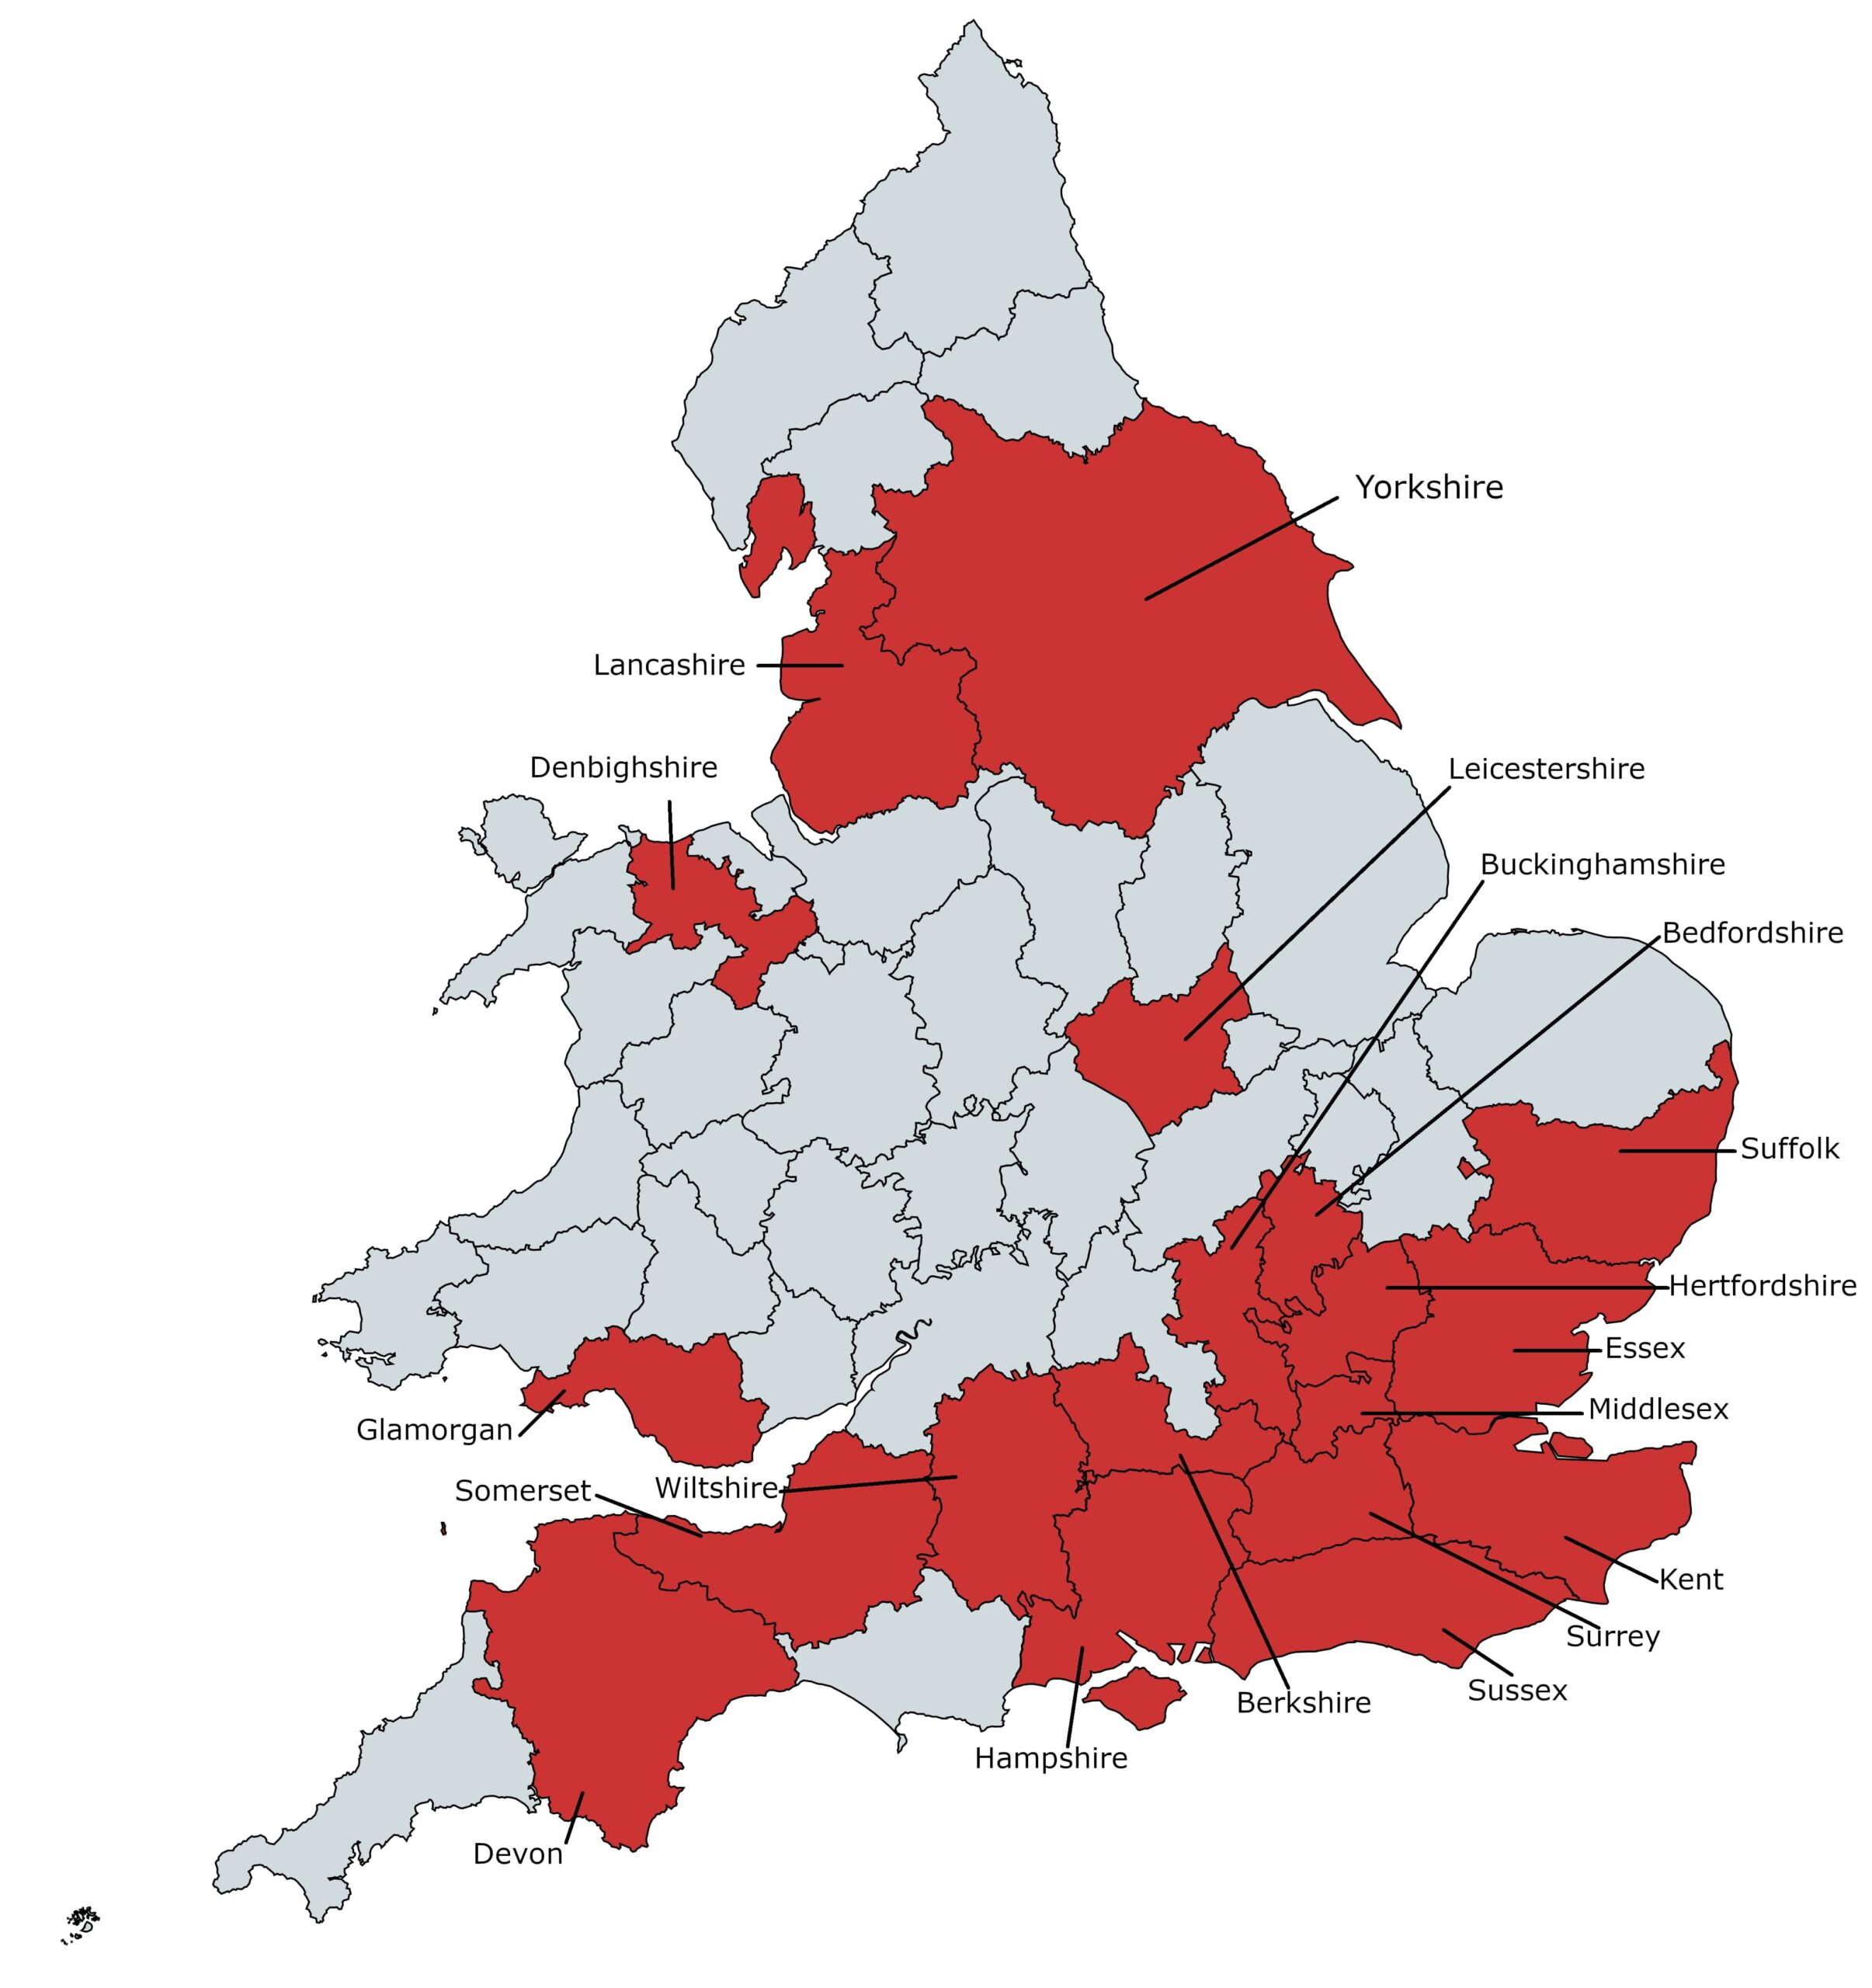 Figure 3: The historic counties of England and Wales, excluding Jersey. The highlighted and named counties are those from which children were admitted to the institutions in this study. Middlesex comprises most of present-day London.